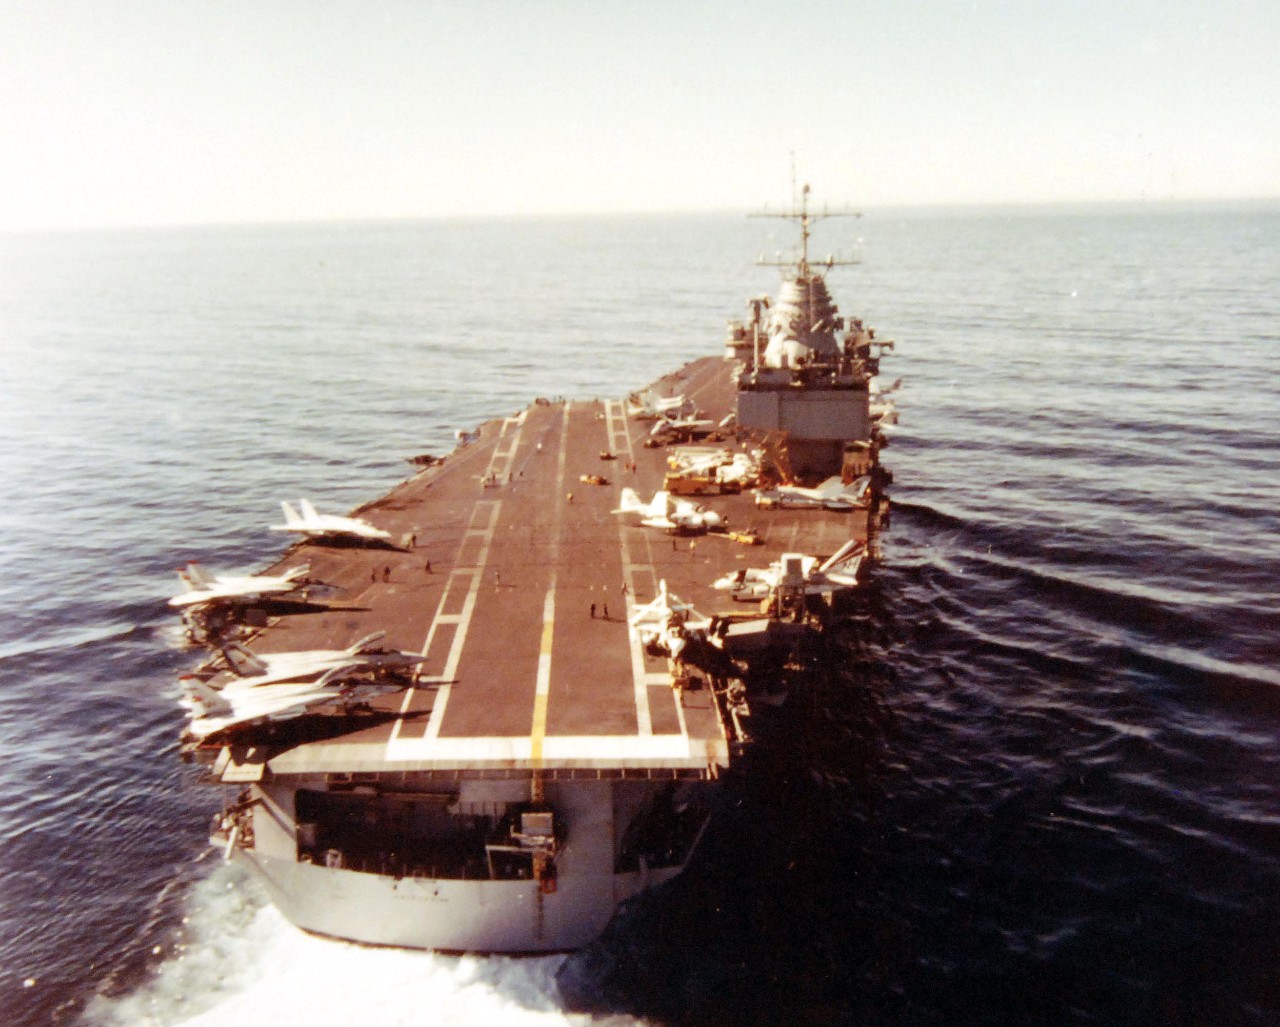 428-GX-K-122195:  USS Enterprise (CVN-65), 1978.   Aerial stern view of the nuclear-powered aircraft carrier while off southern California.  Photographed by PH3 Ted Kappler, December 11, 1978.   Official U.S. Navy Photograph, now in the collections of the National Archives.  (2017/11/29).  